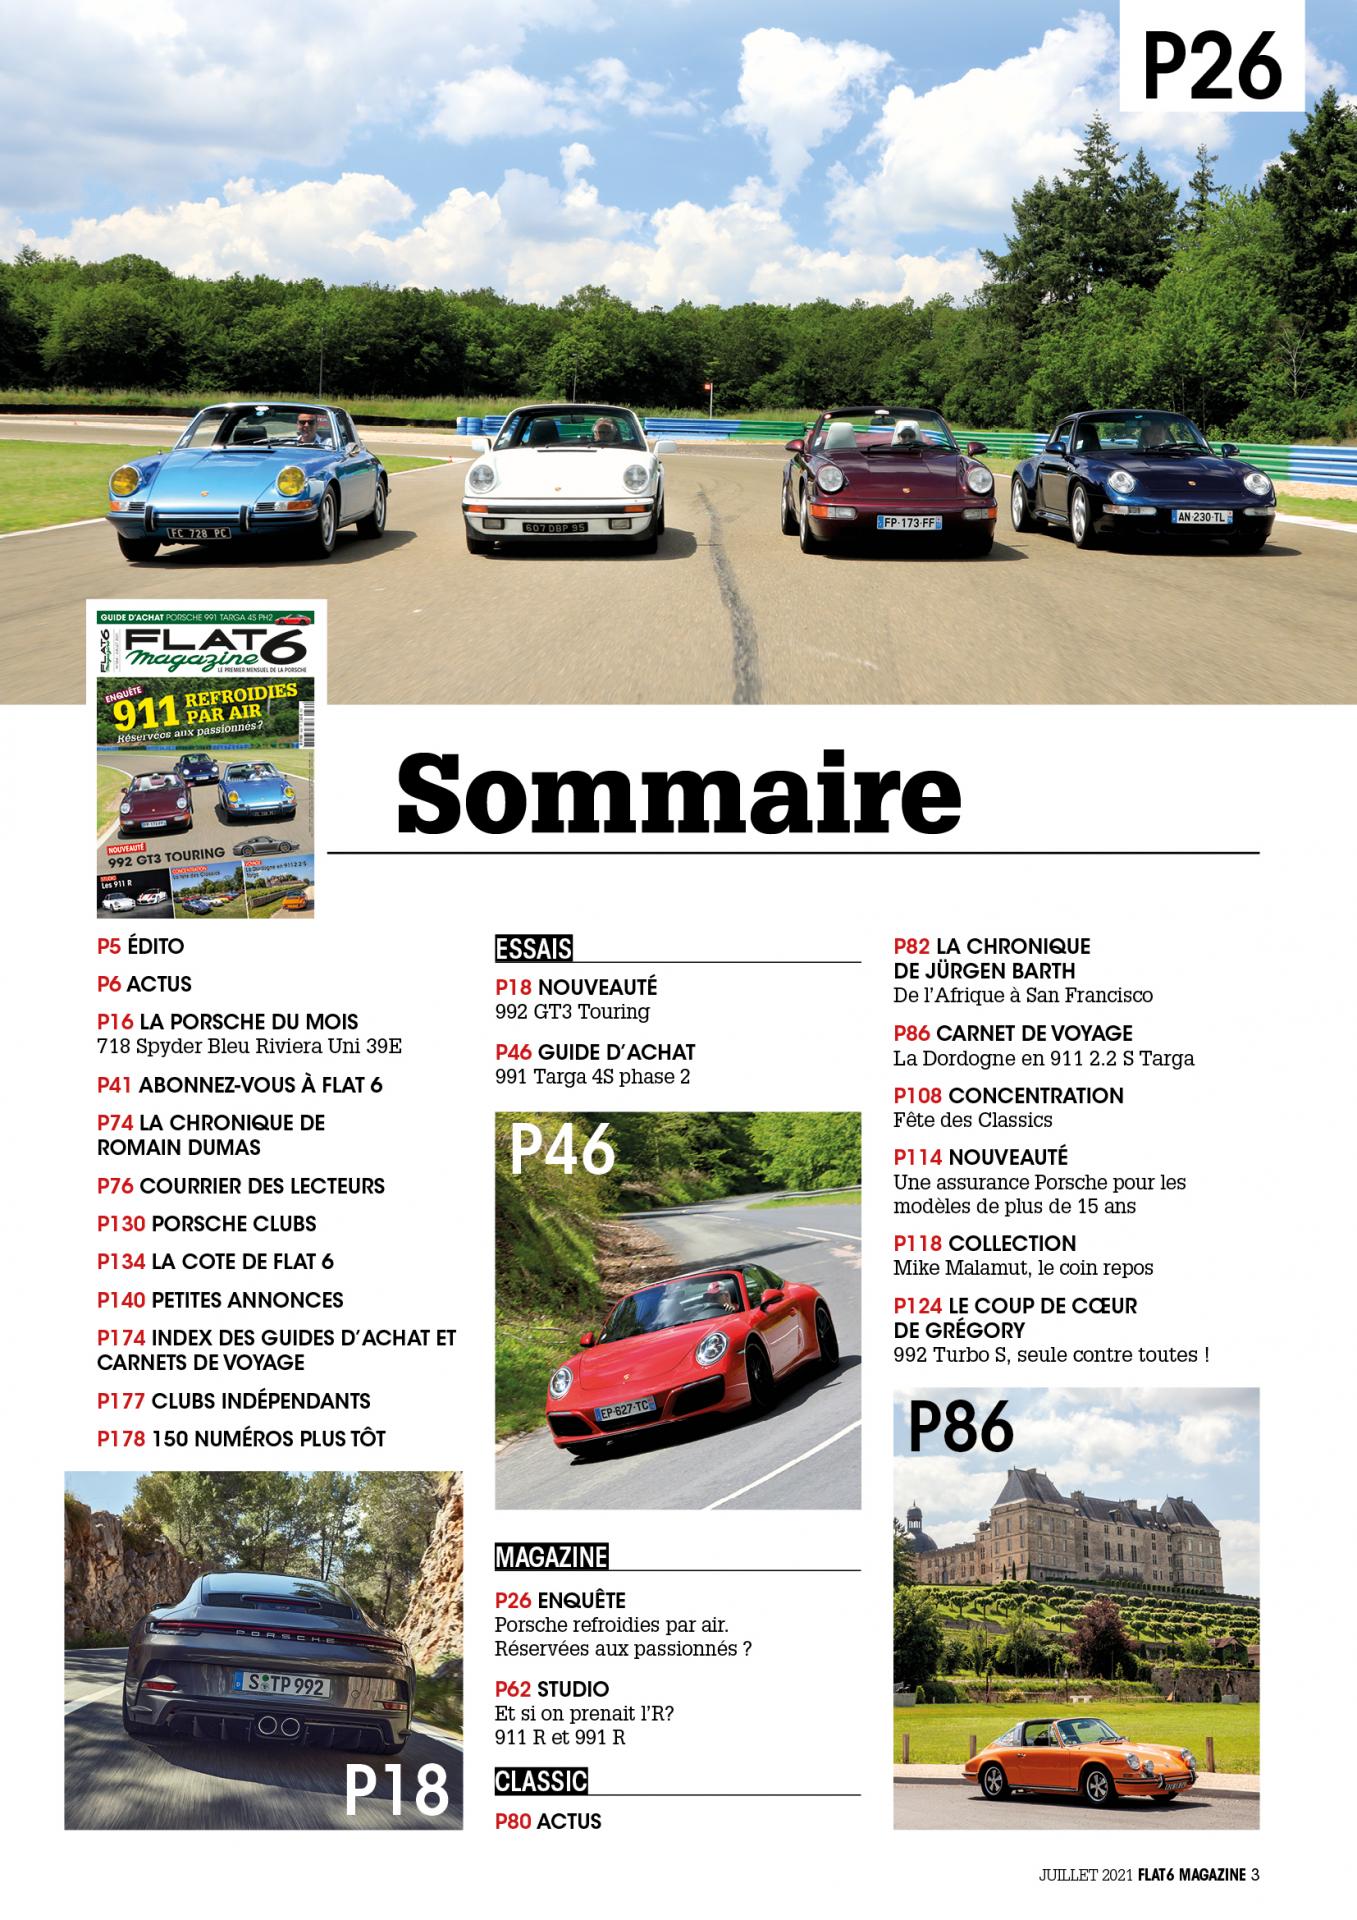 Sommaire364